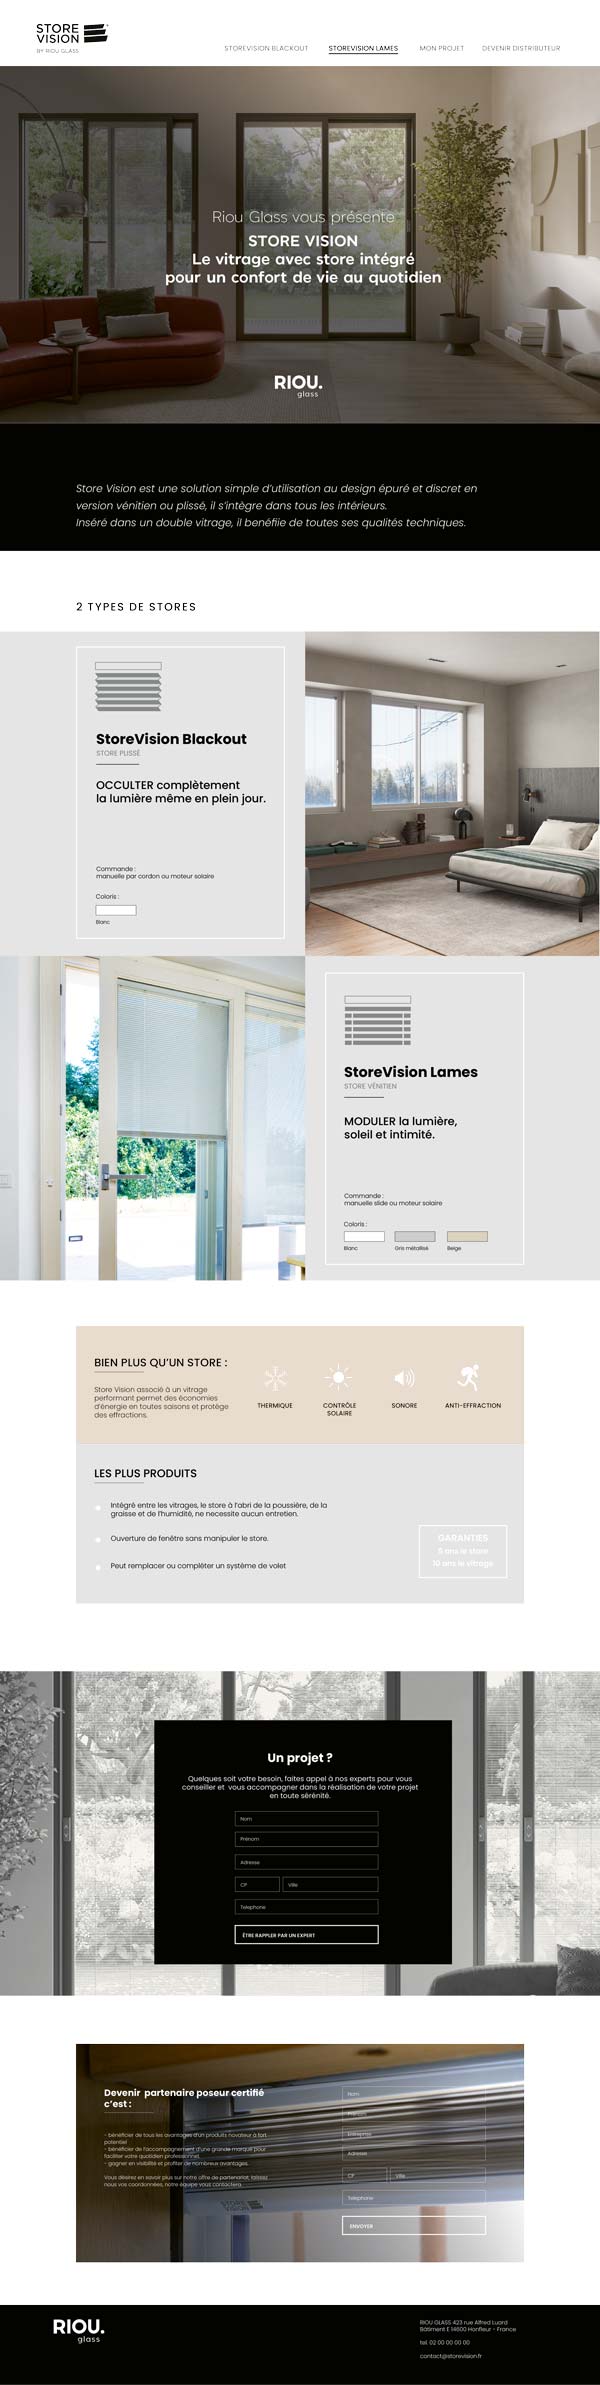 store vision site onepage